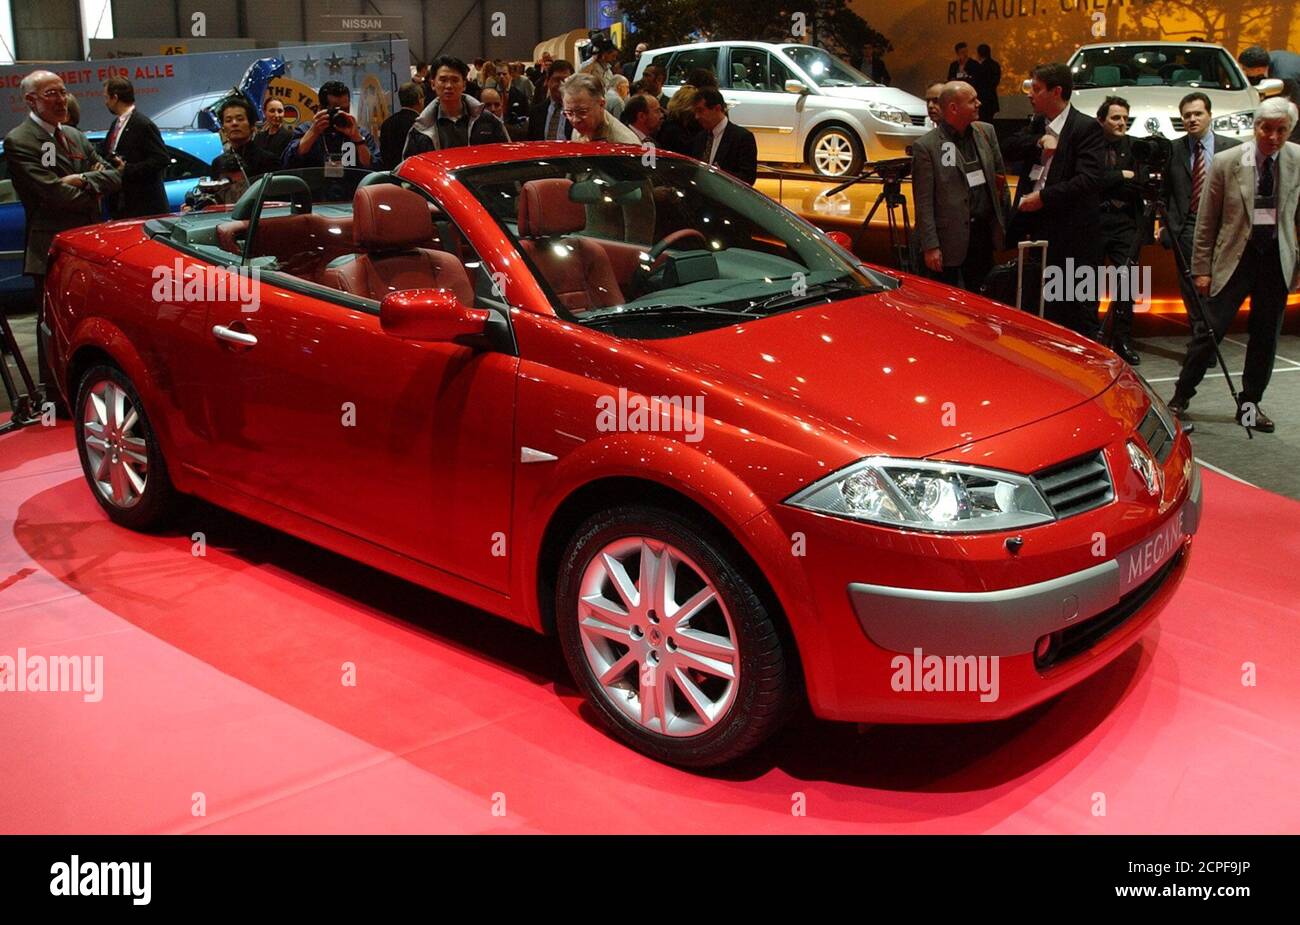 The new Renault Megane II Convertible Cabriolet is on display as a first  world presentation at the Geneva car show in Geneva, Switzerland, March 4,  2003. The car comes equipped with alternative